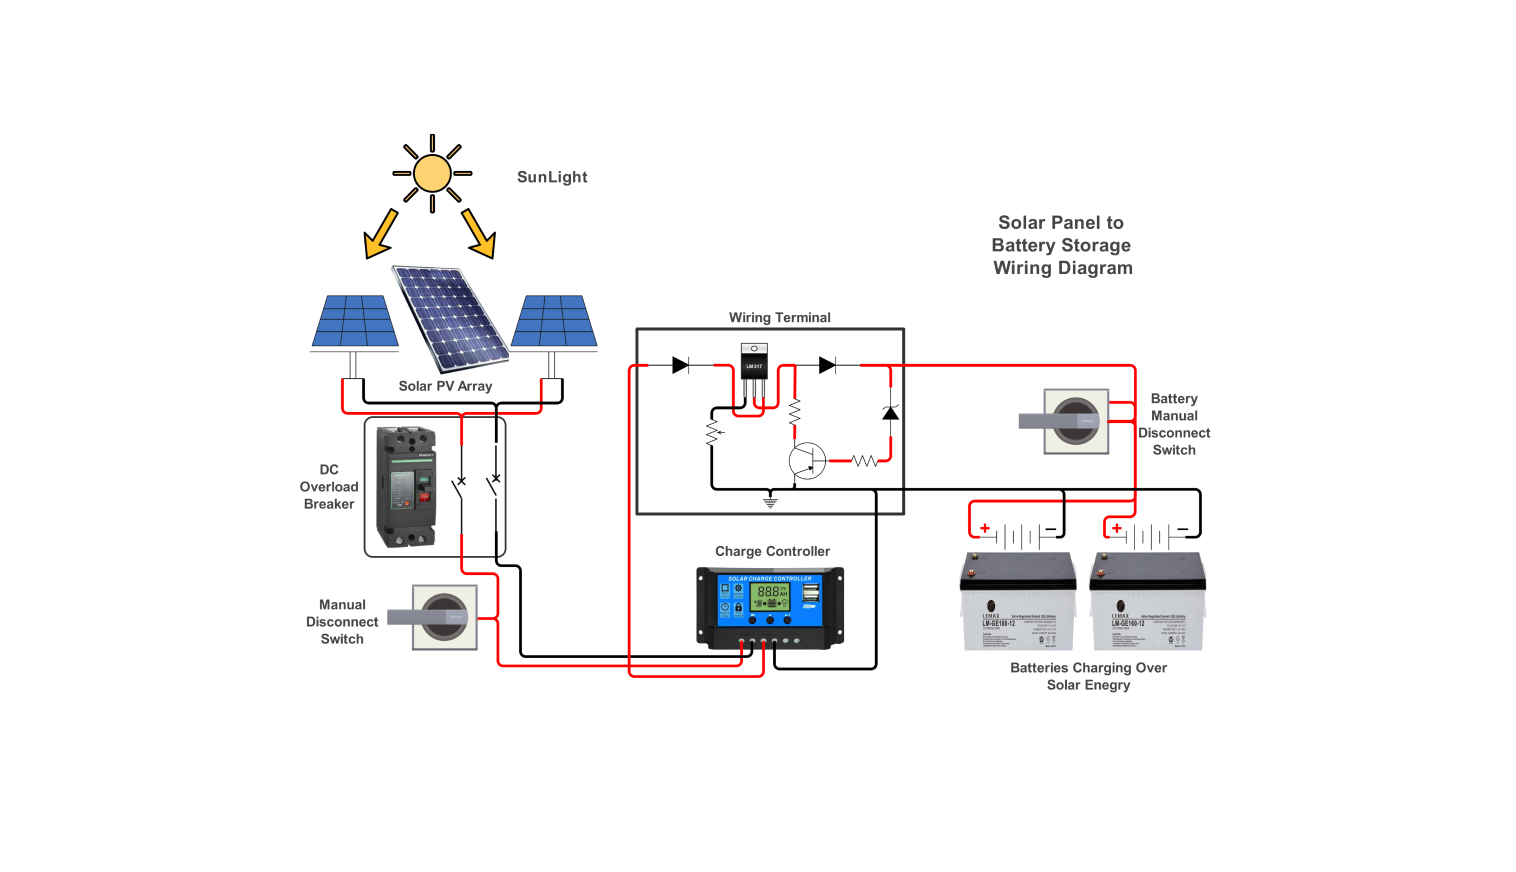 Solar panel to battery charging system wiring diagram